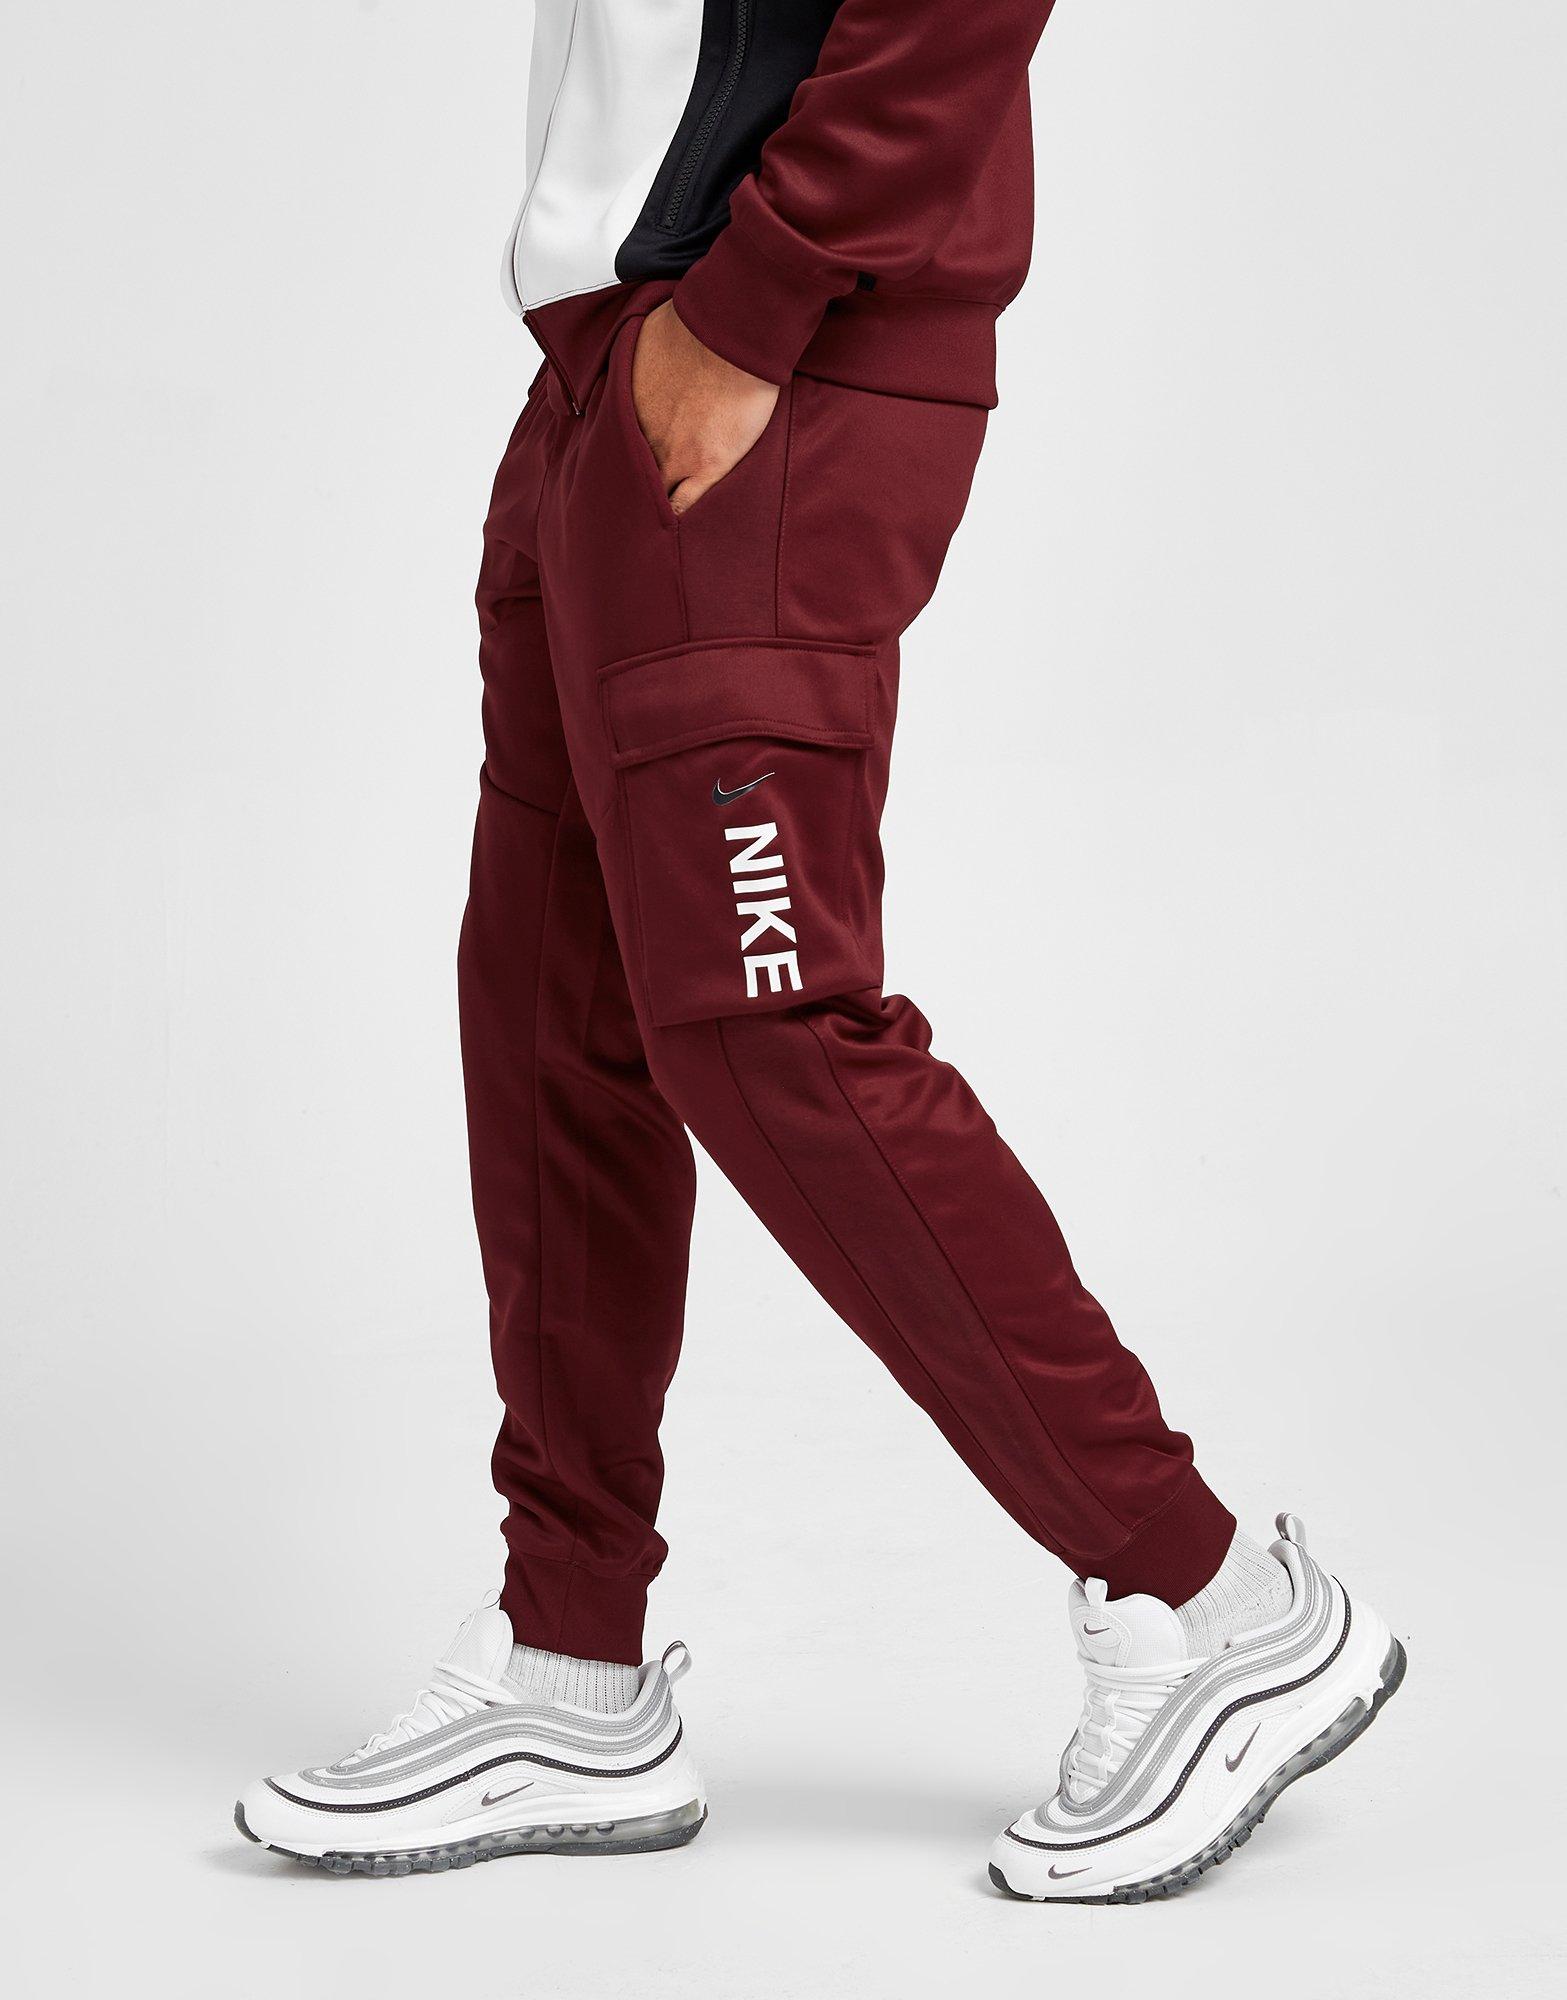 Red Nike Track Pants | Sports